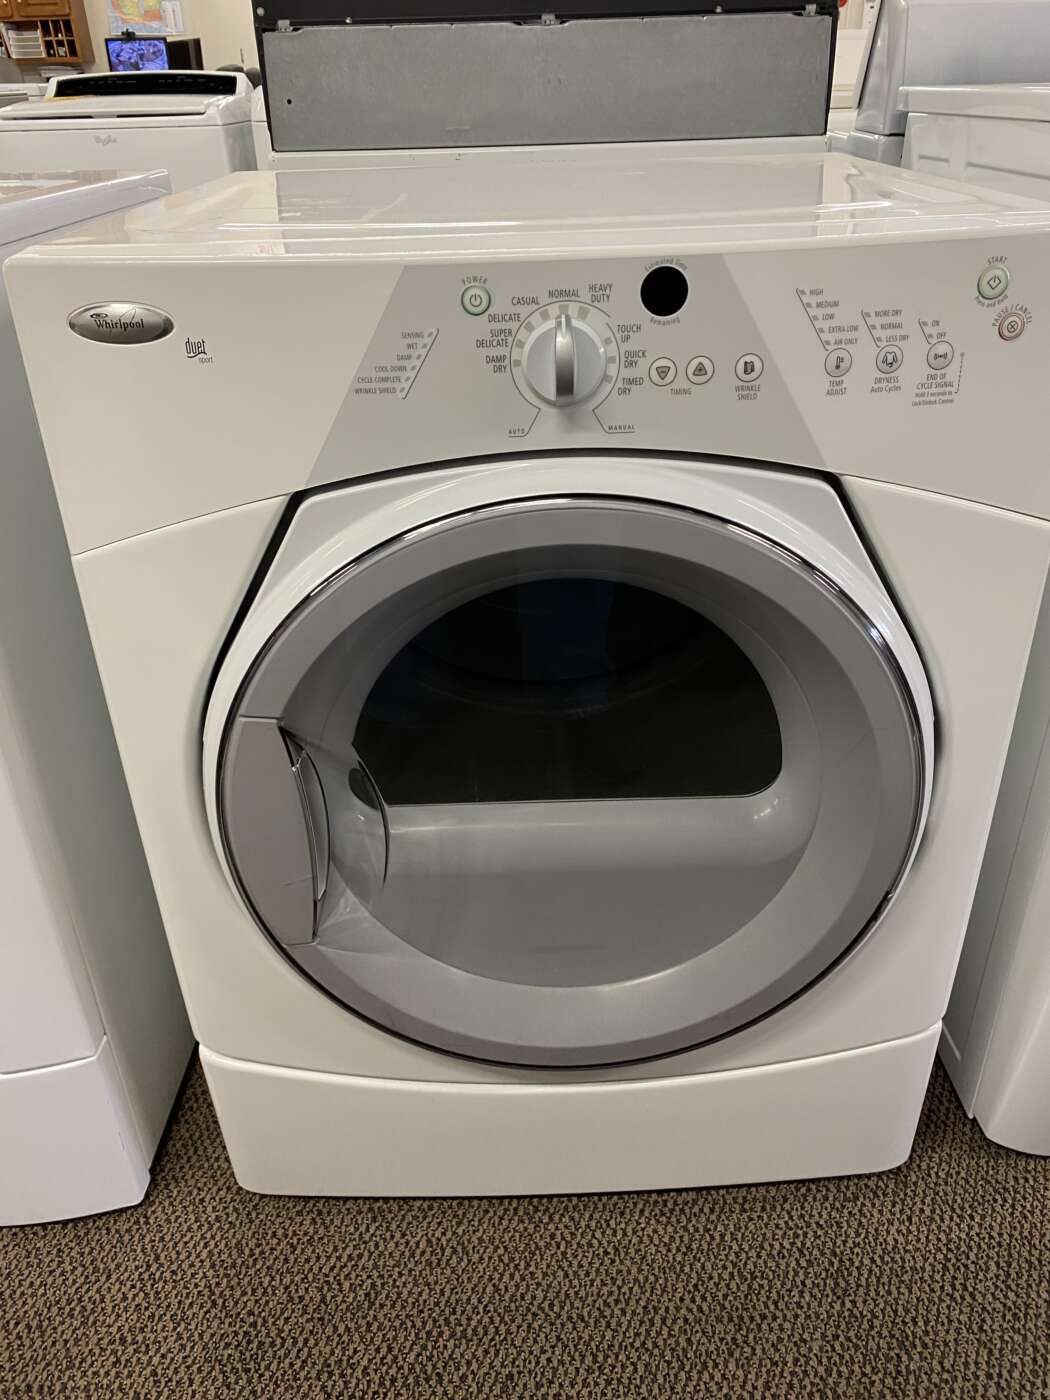 Reconditioned WHIRLPOOL 6.7 Cu. Ft. Electric Dryer – White